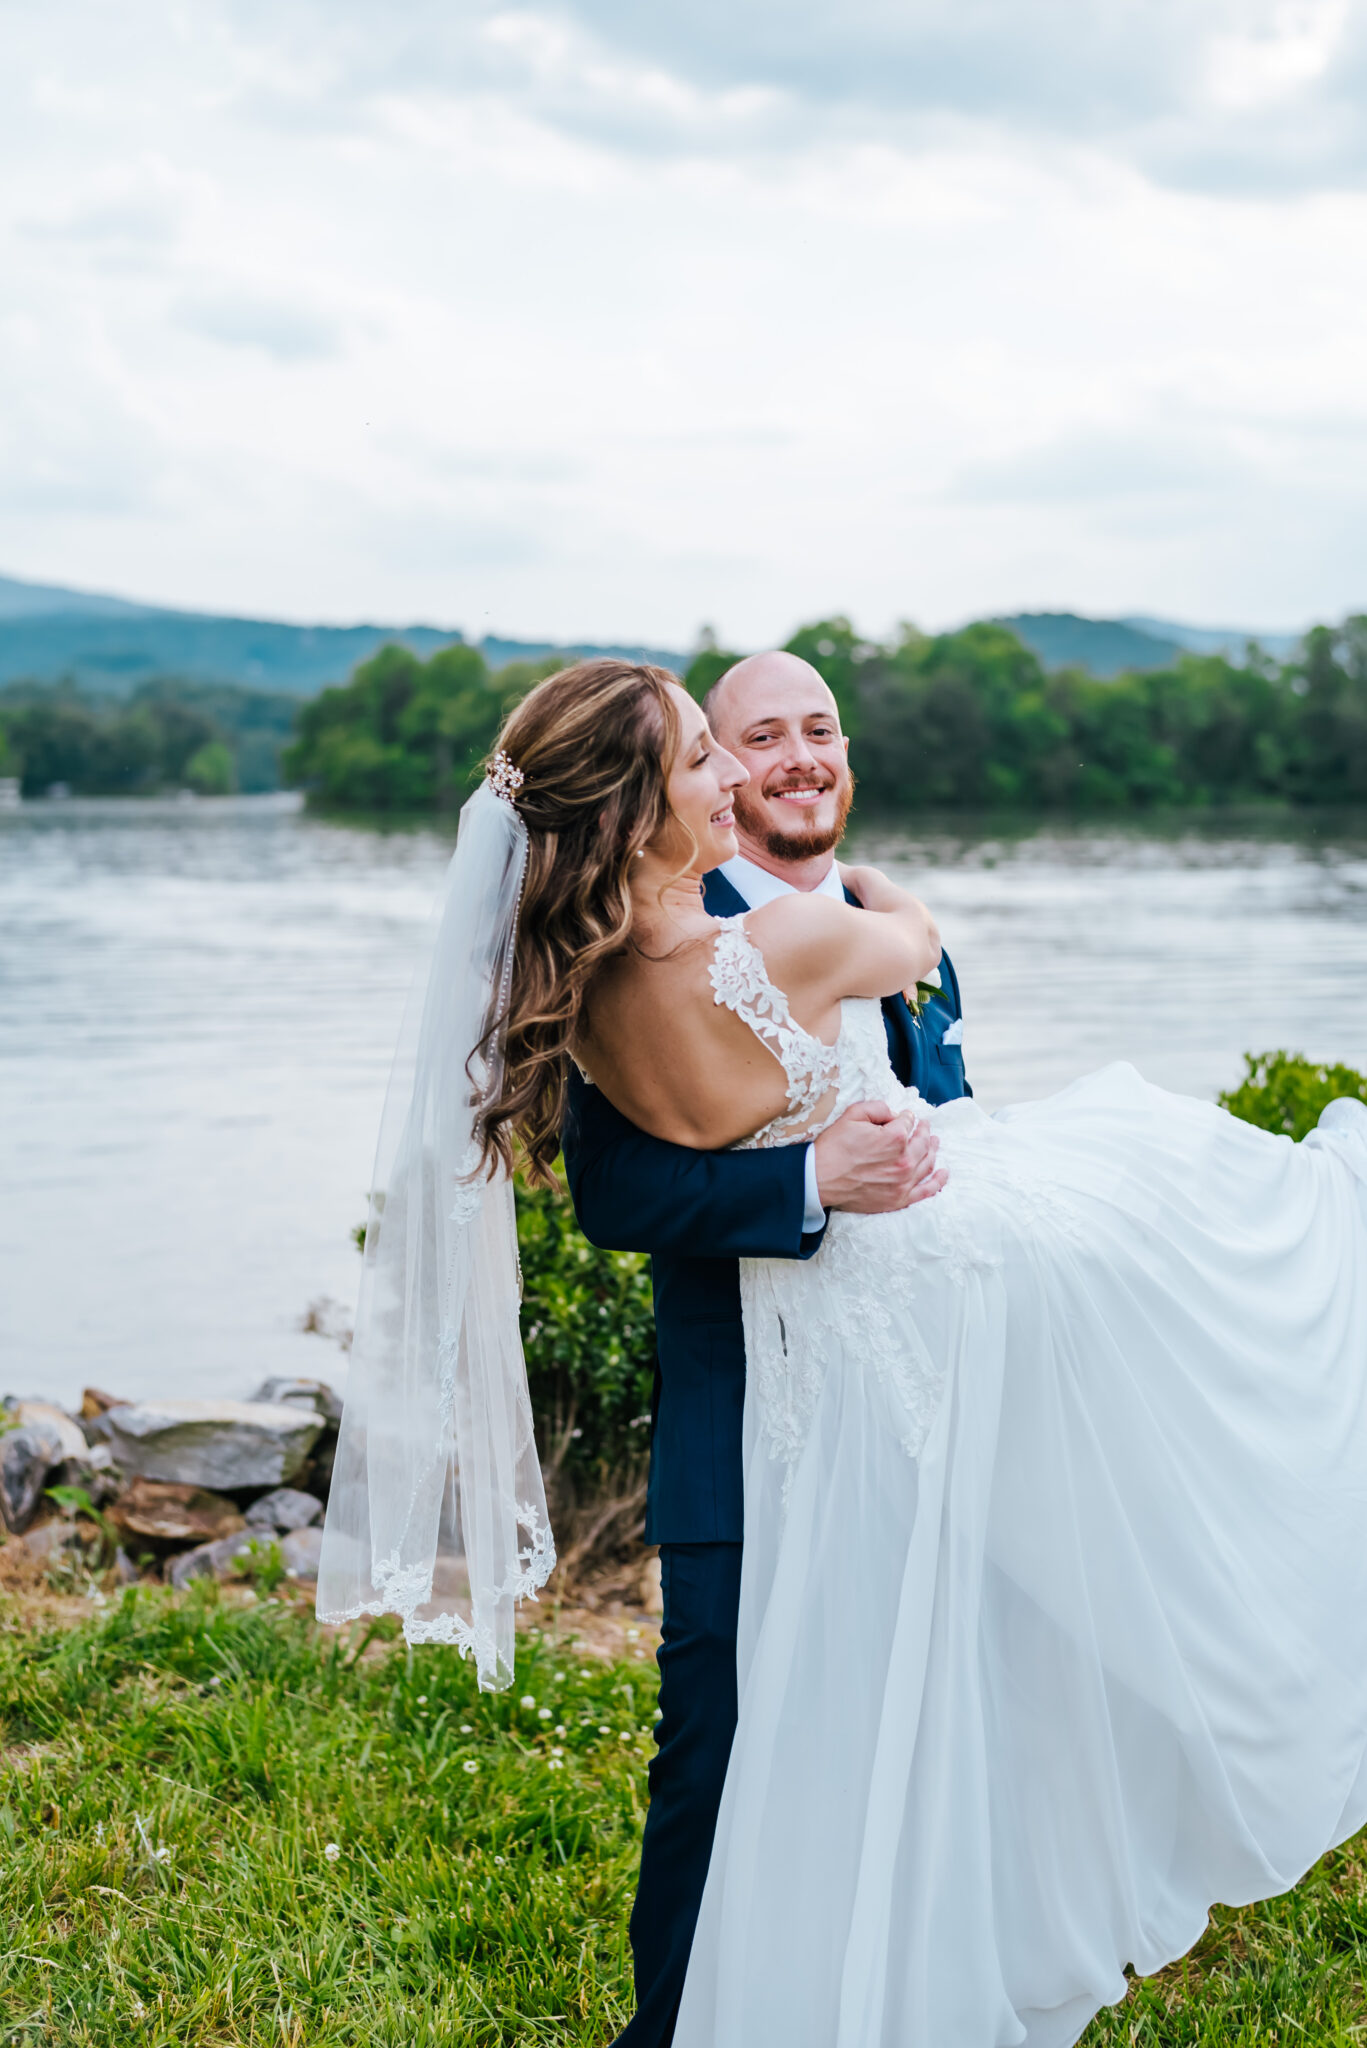 A groom carries his bride in her wedding dress and veil as they walk in front of a beautiful mountain lake